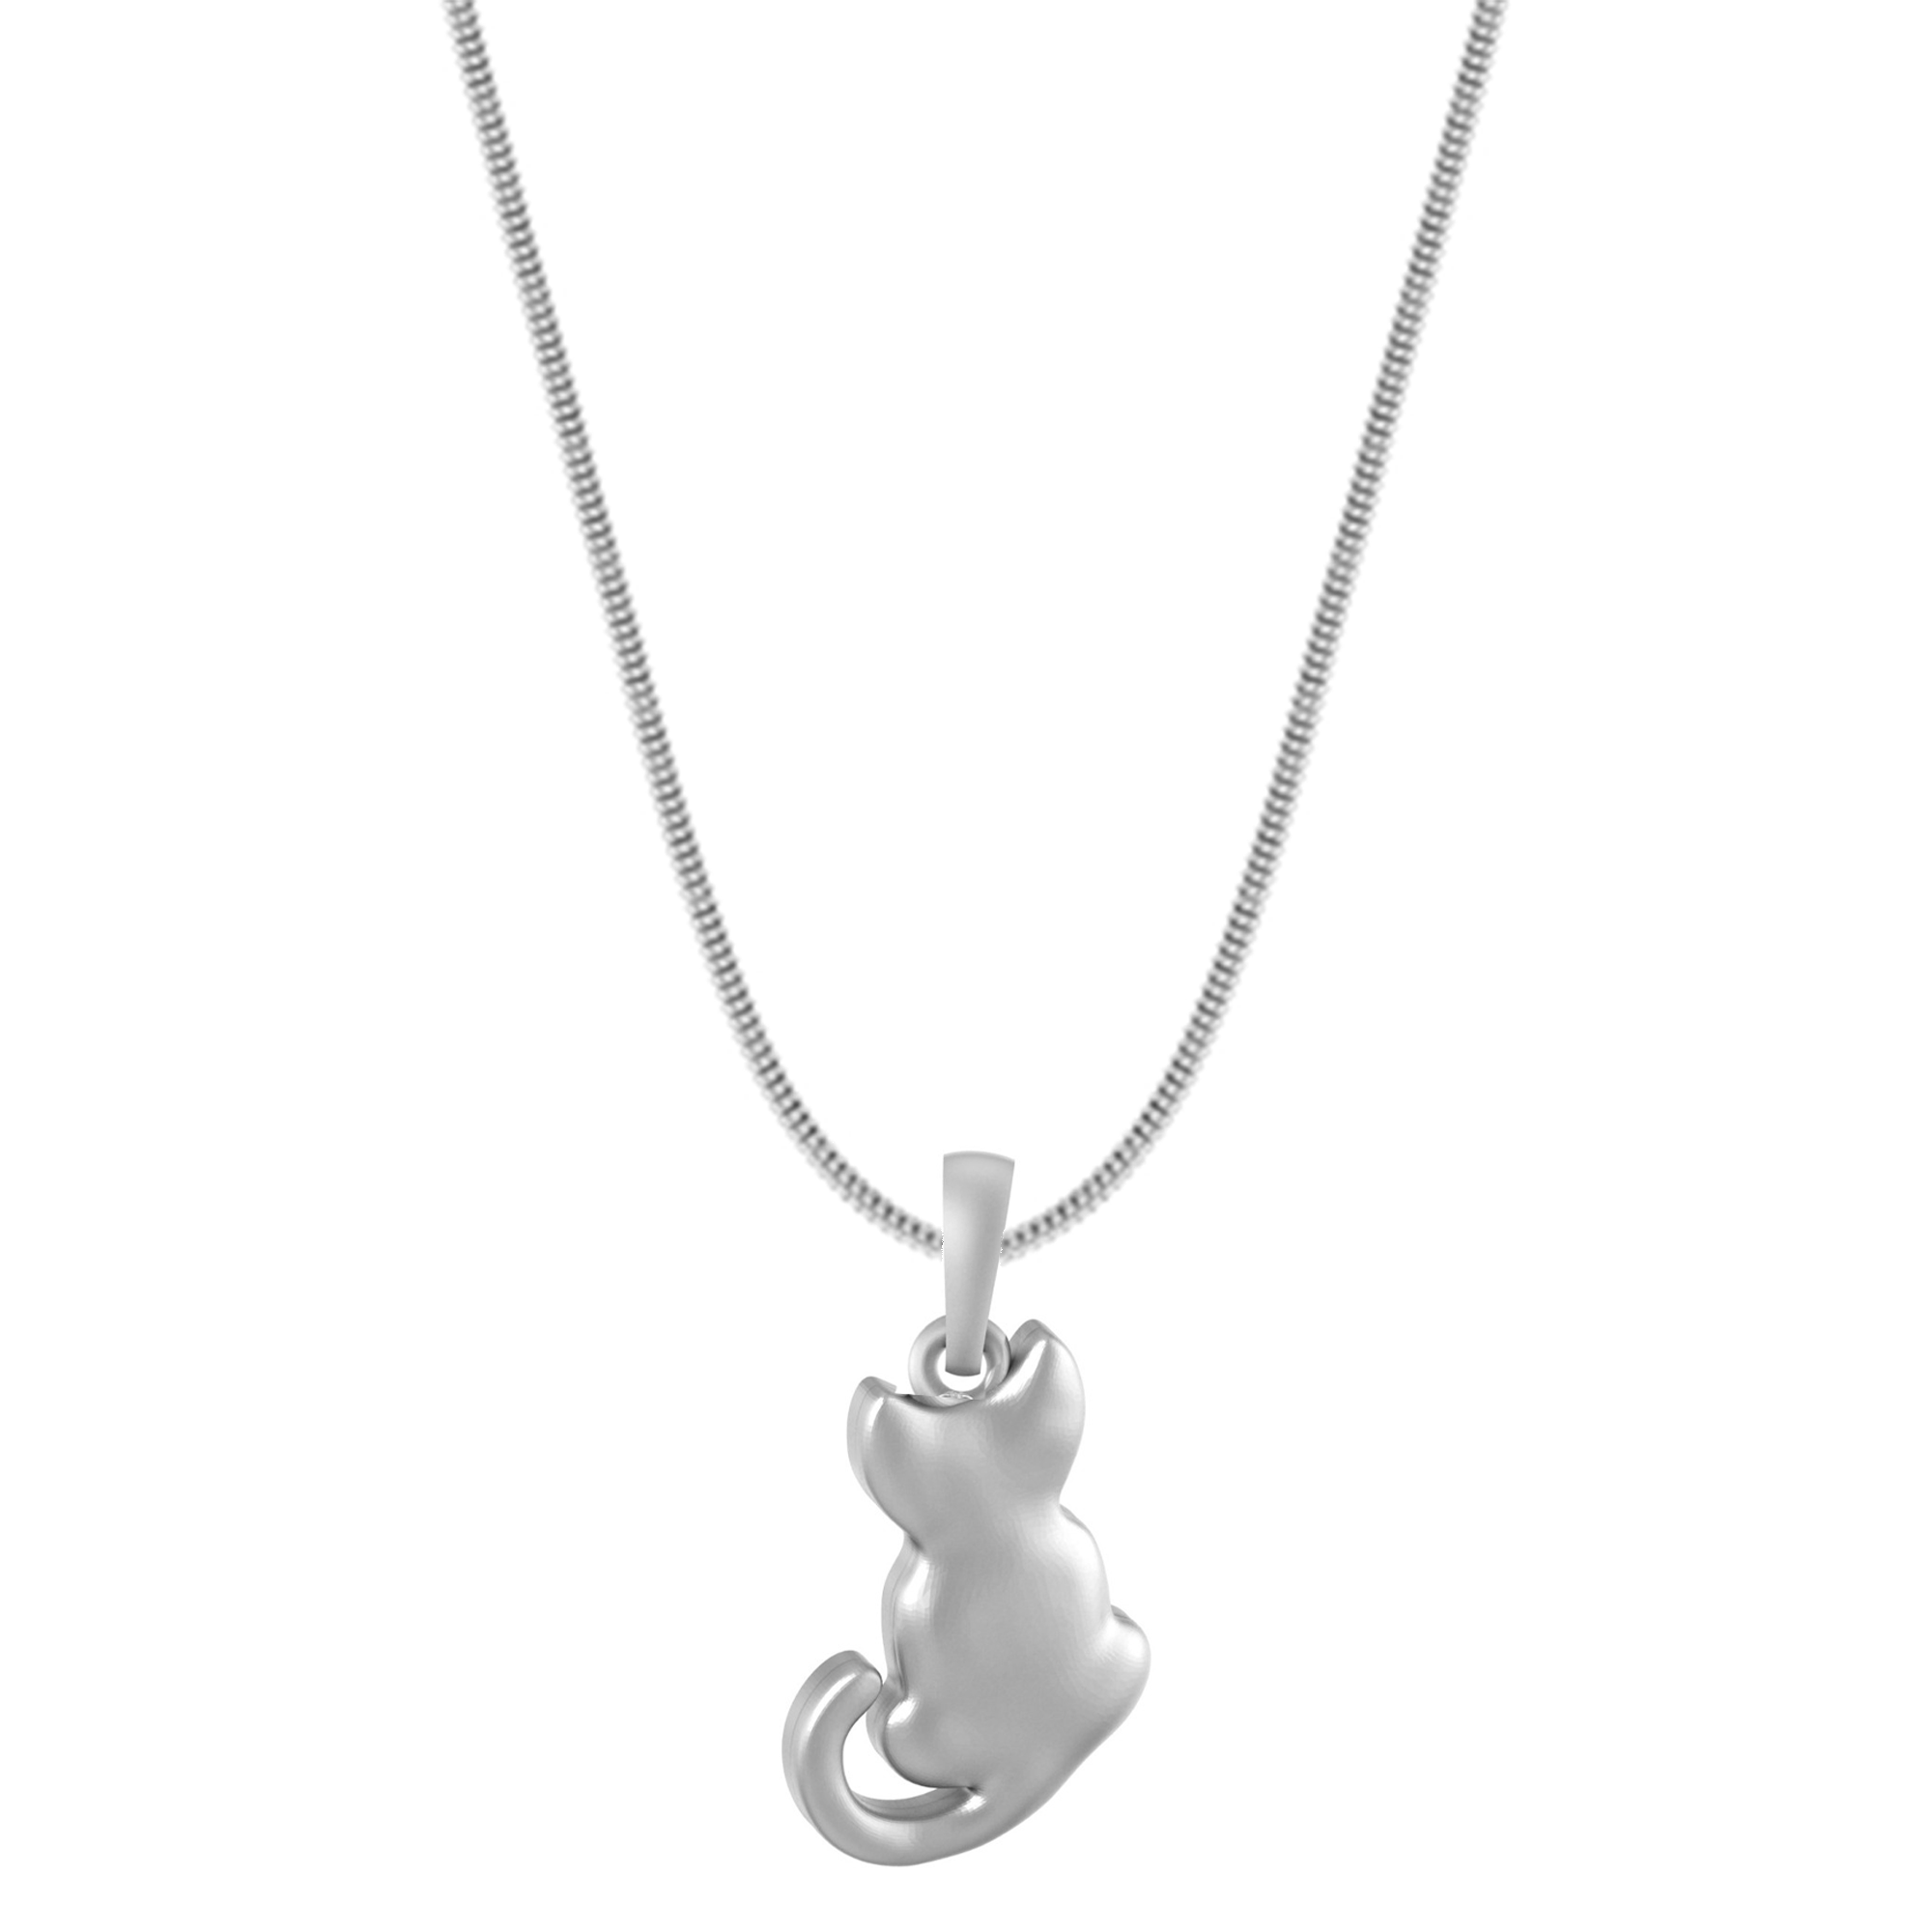 Akshat Sapphire Sterling Silver (92.5% purity) Stylish and Fashionable Cute Cat Chain Pendant (Pendant with Snake Chain) for Men & Women Pure Silver Cat Chain Locket for Happiness and joy